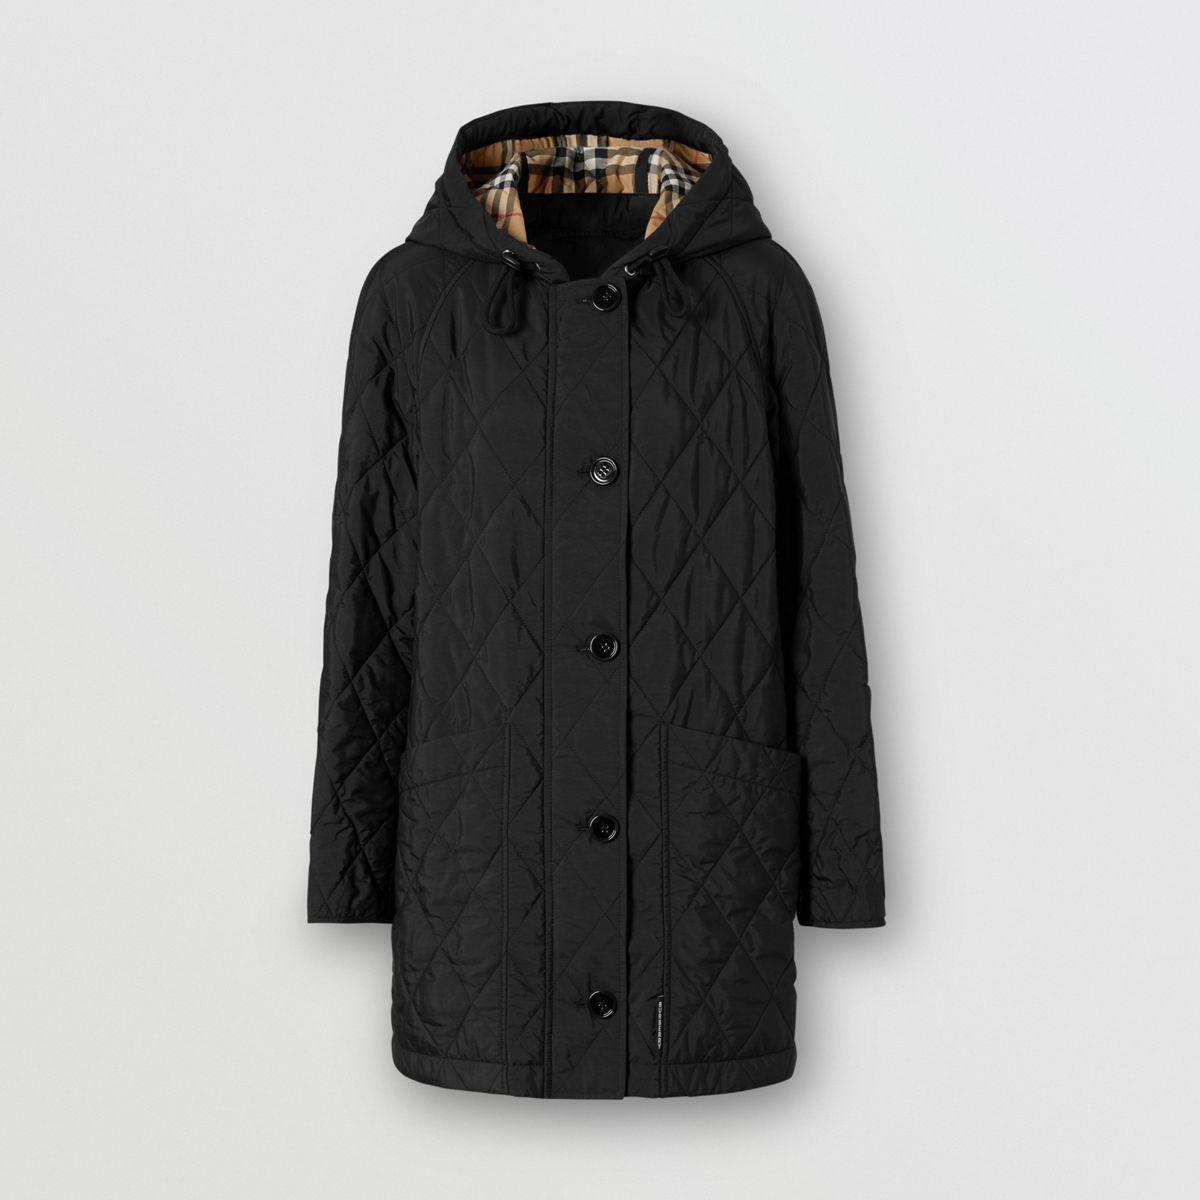 Burberry Diamond Quilted Thermoregulated Hooded Coat in Black | Lyst